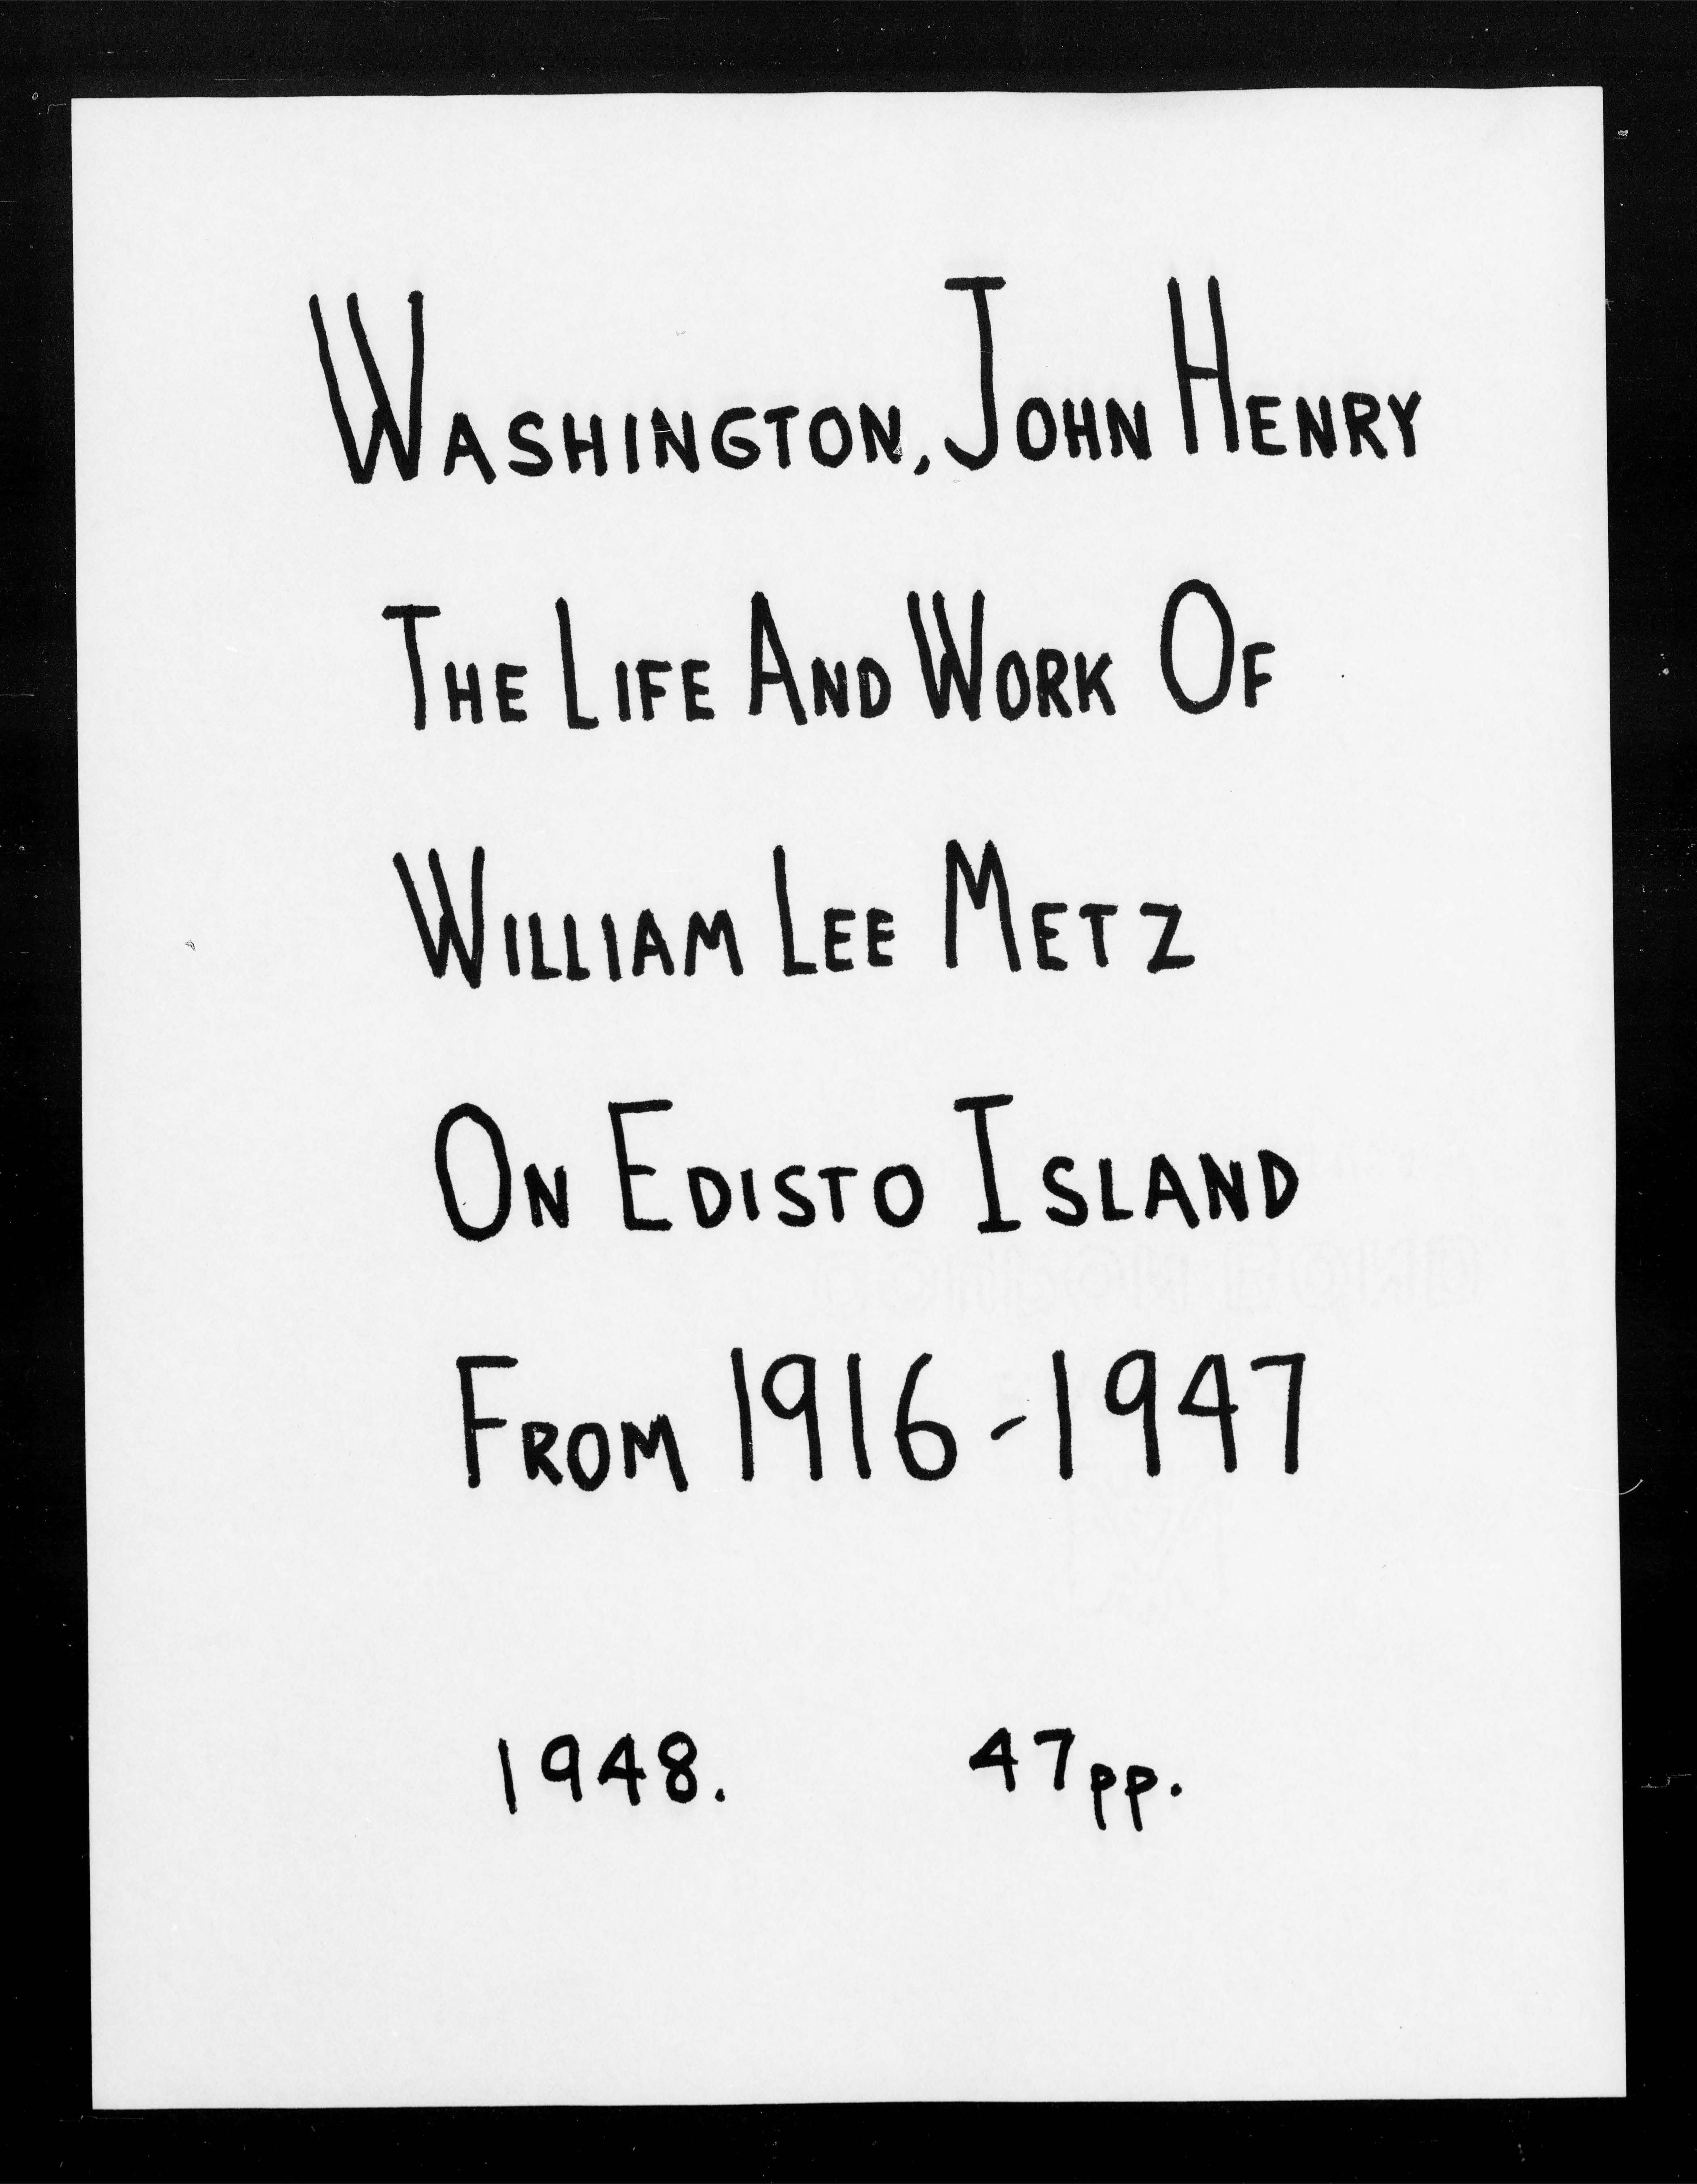 The Life and Work of William Lee Metz on Edisto Island from 1916 to 1947.